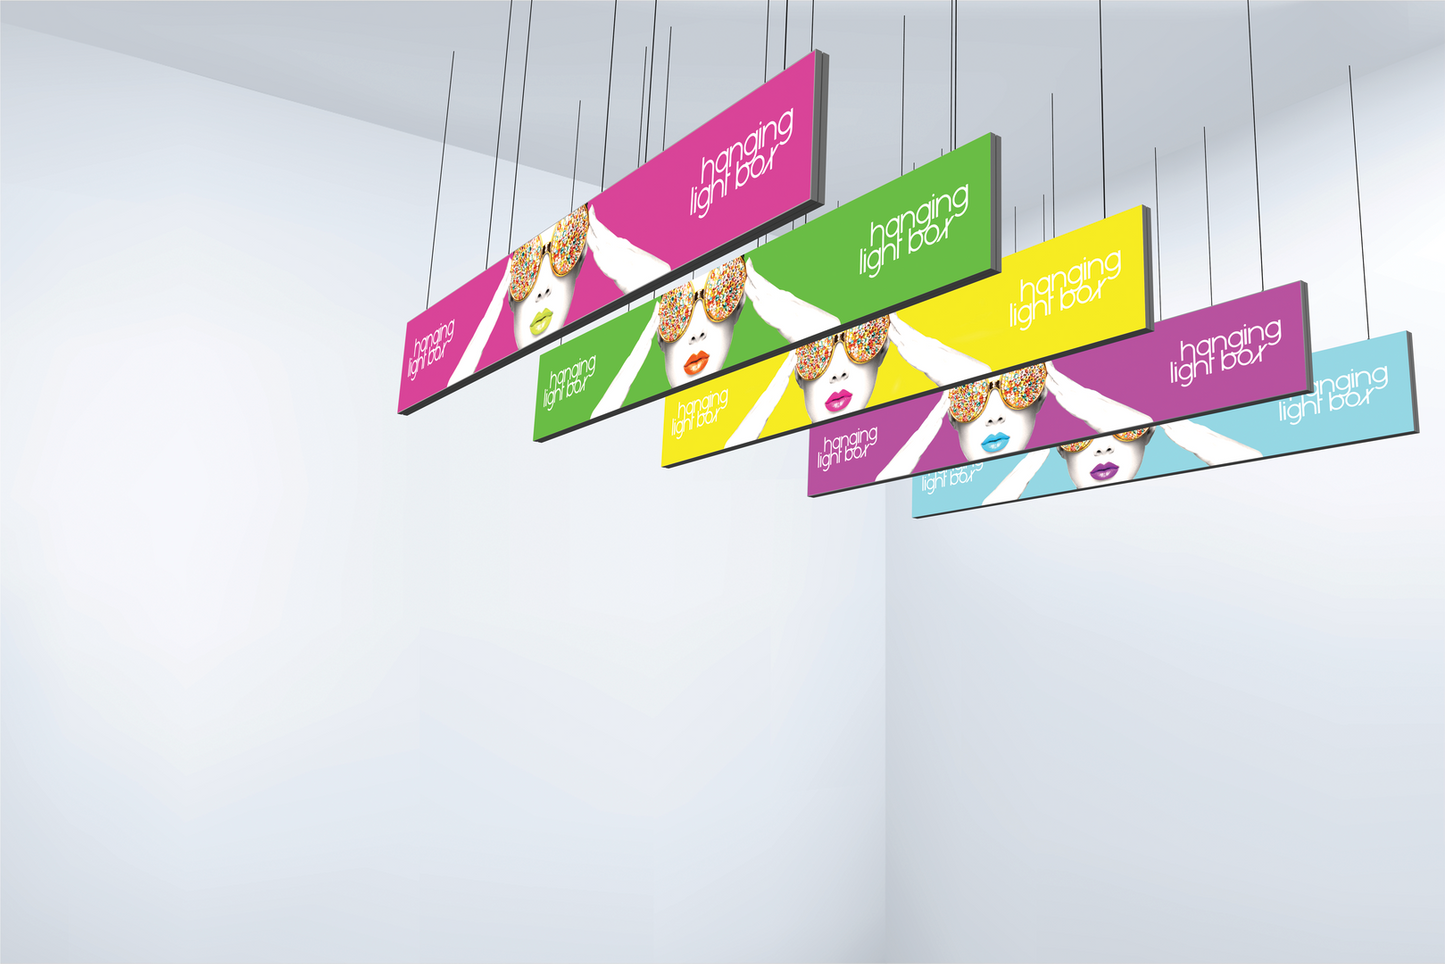 30ft x 3ft Vector Frame Hanging Light Box Single-Sided (Graphic Package)